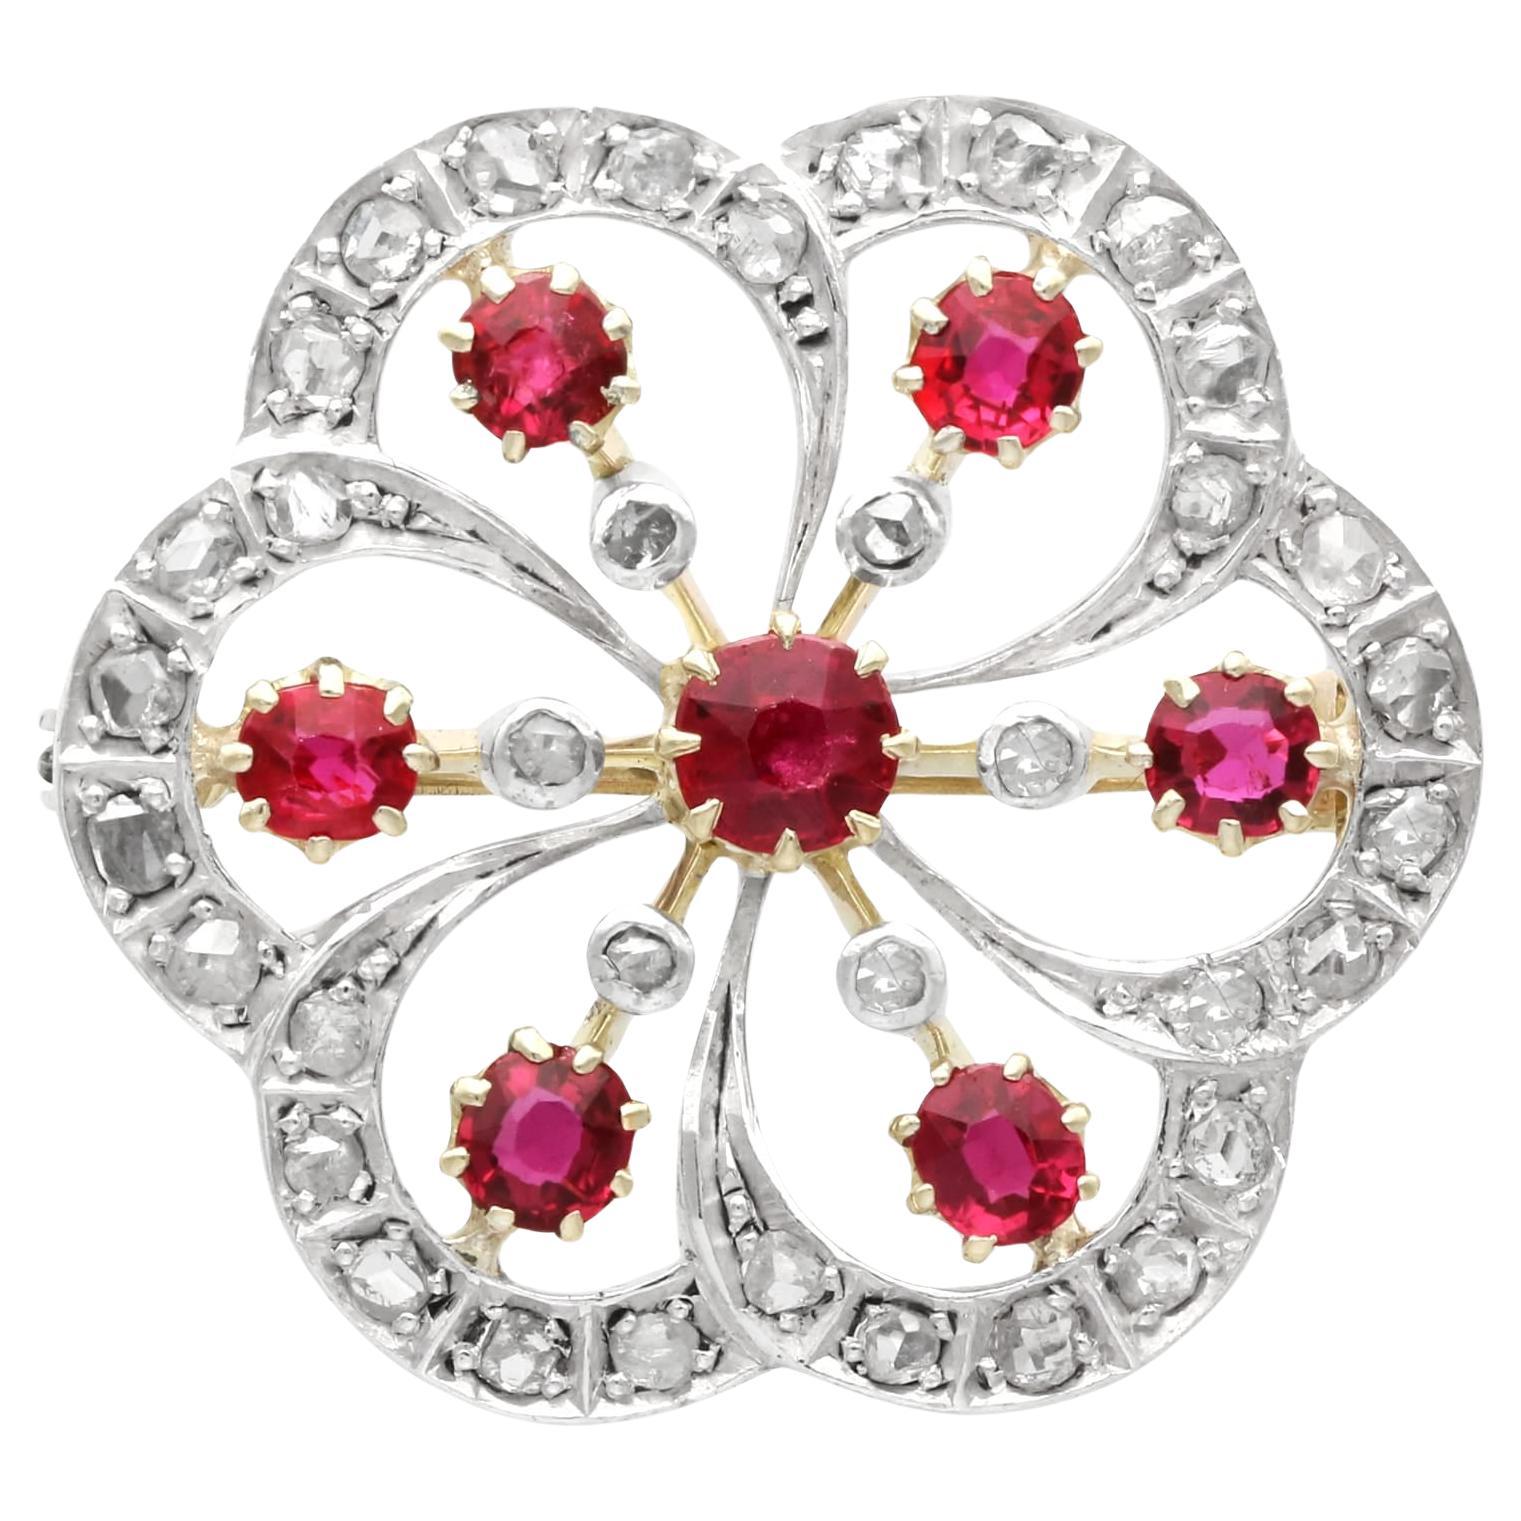 Antique 1.50Ct Ruby and 0.60Ct Diamond 12k Yellow Gold Flower Brooch Circa 1890